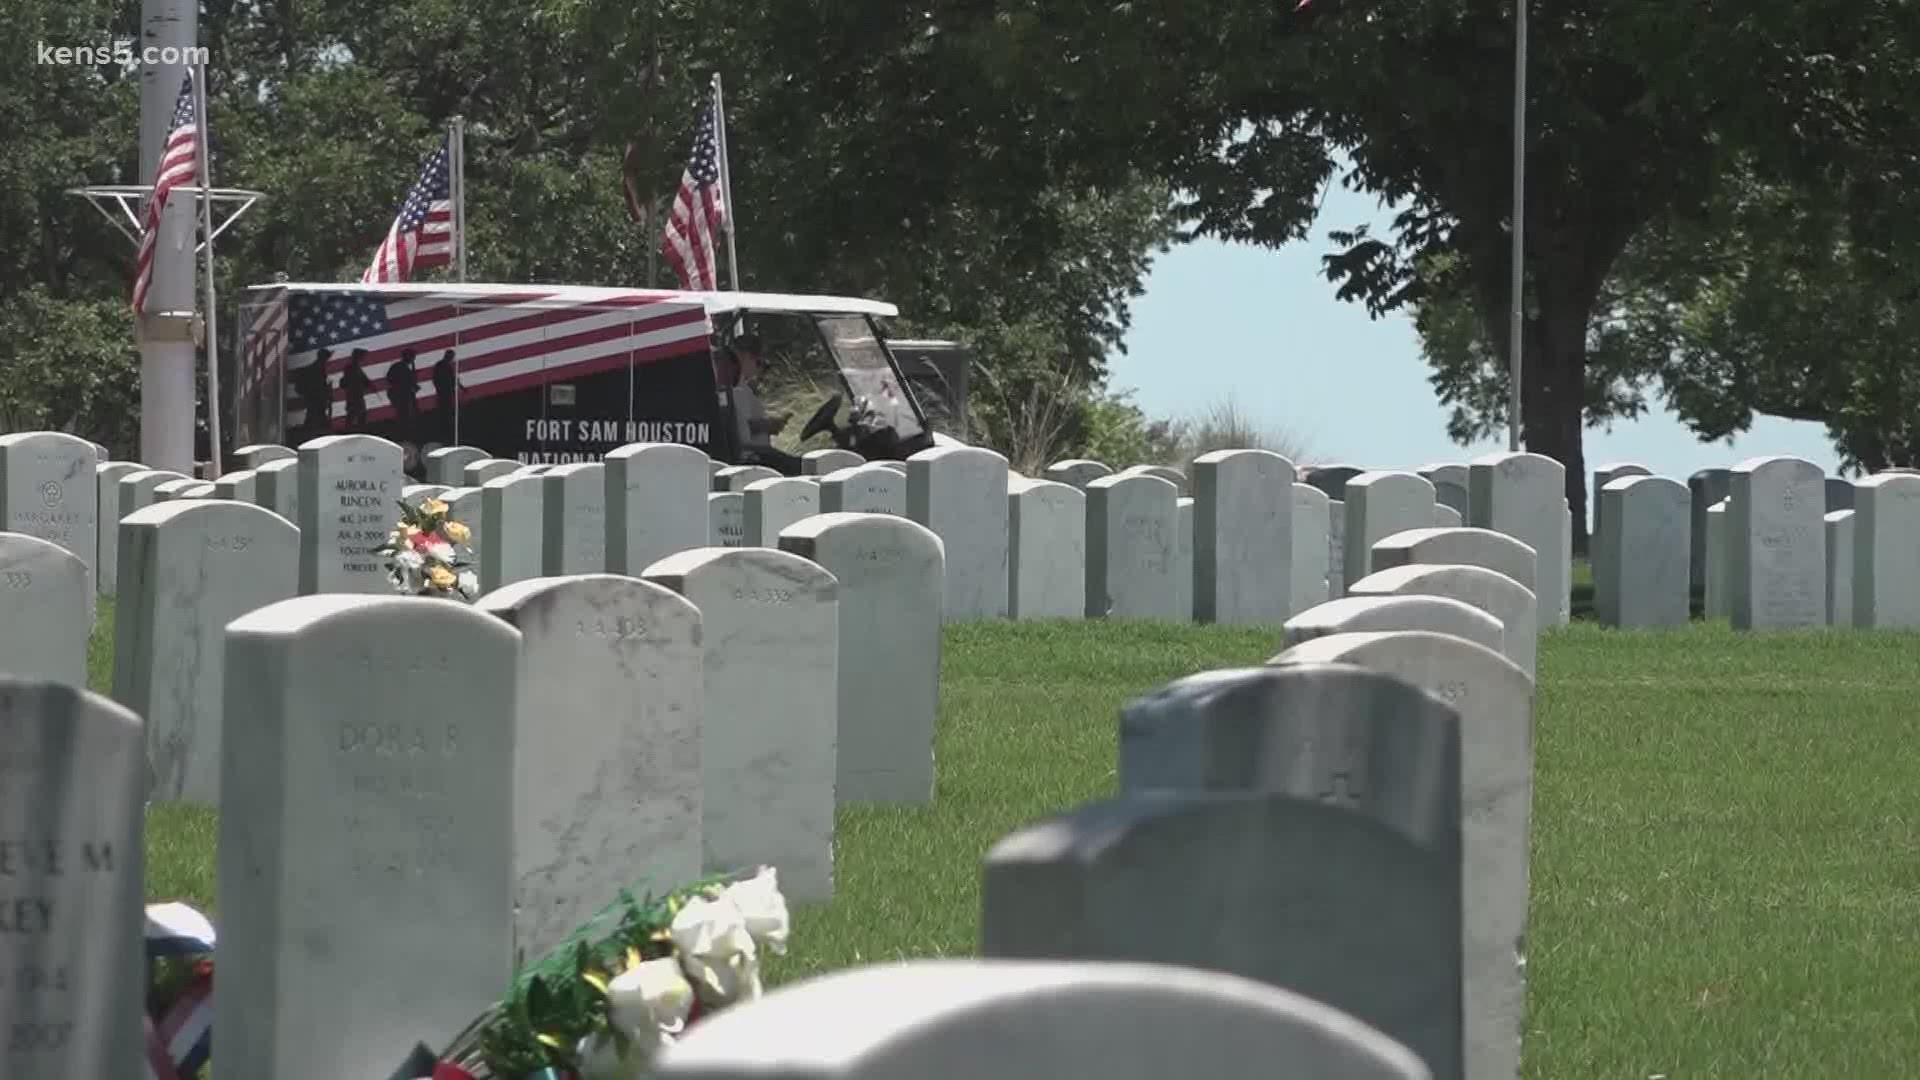 Across the country, and in San Antonio, veterans are being buried without their customary honors or committal ceremonies for now - due to the coronavirus pandemic.